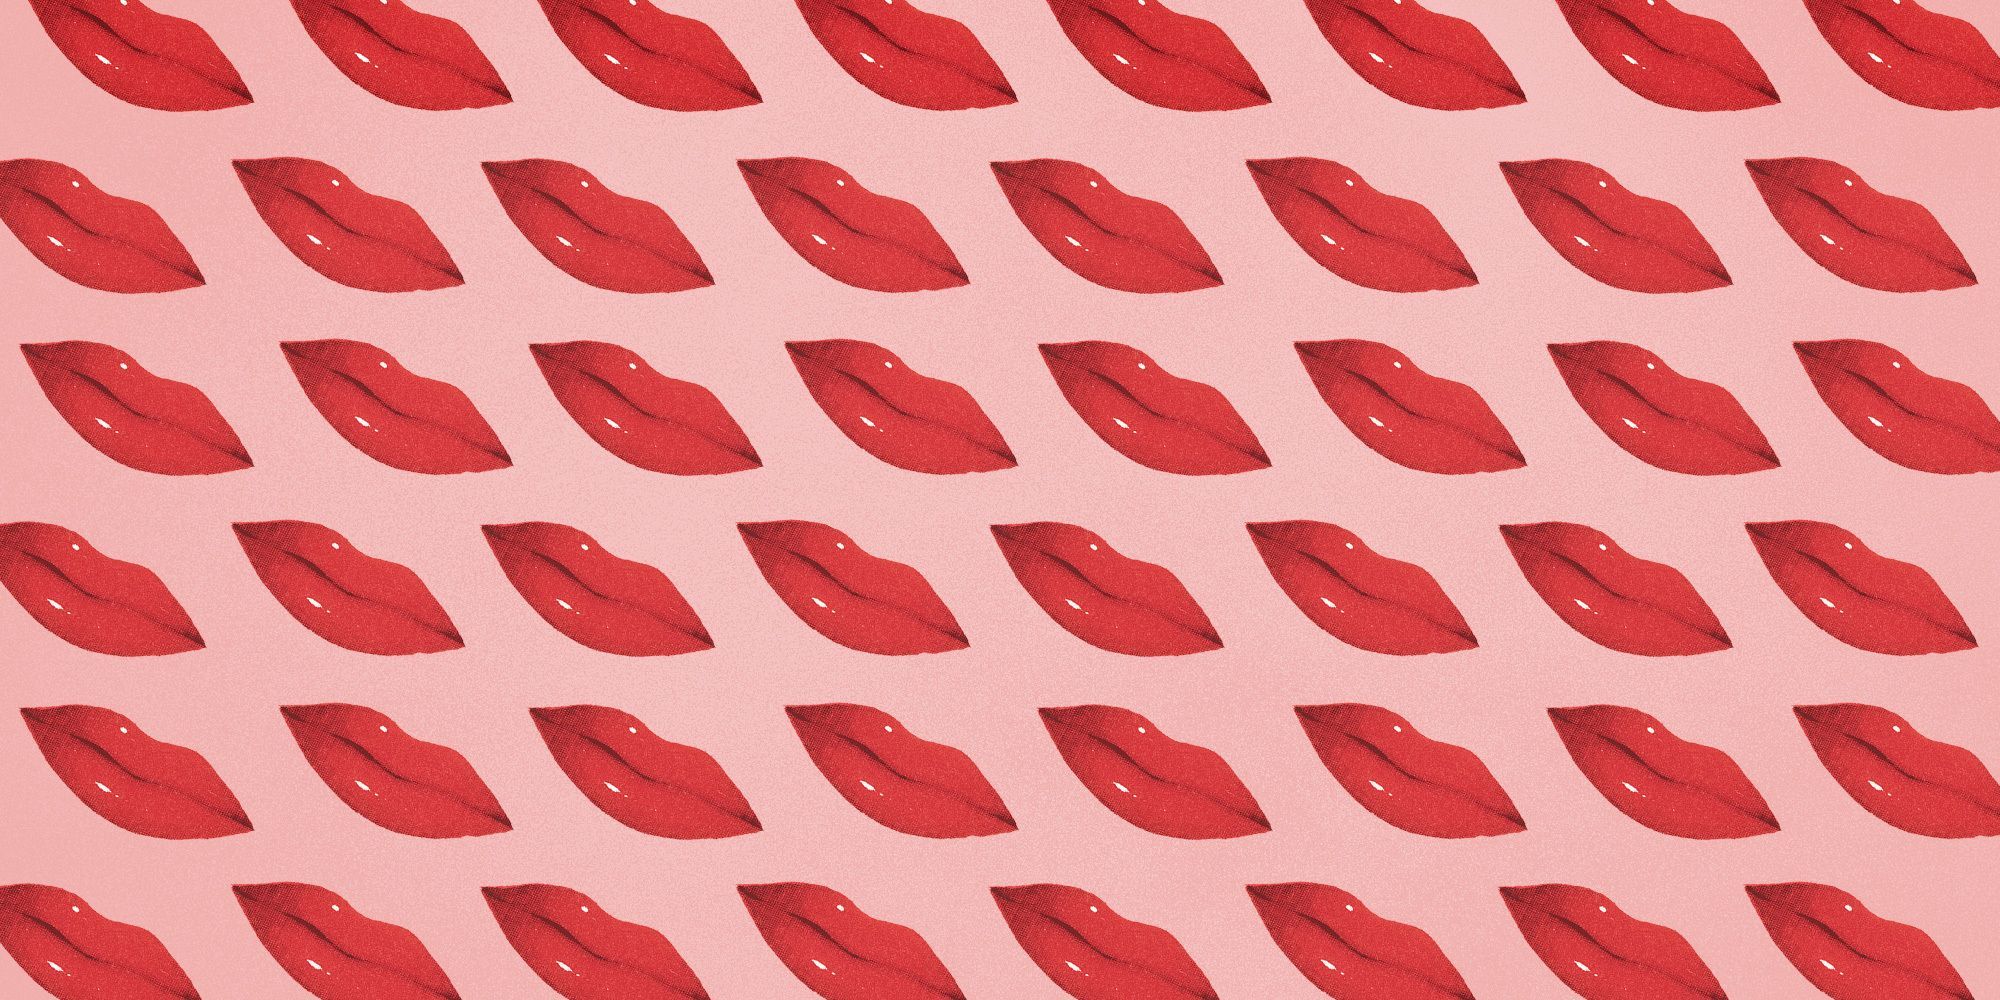 A pattern of red lips on a pink background - Rolling Stones